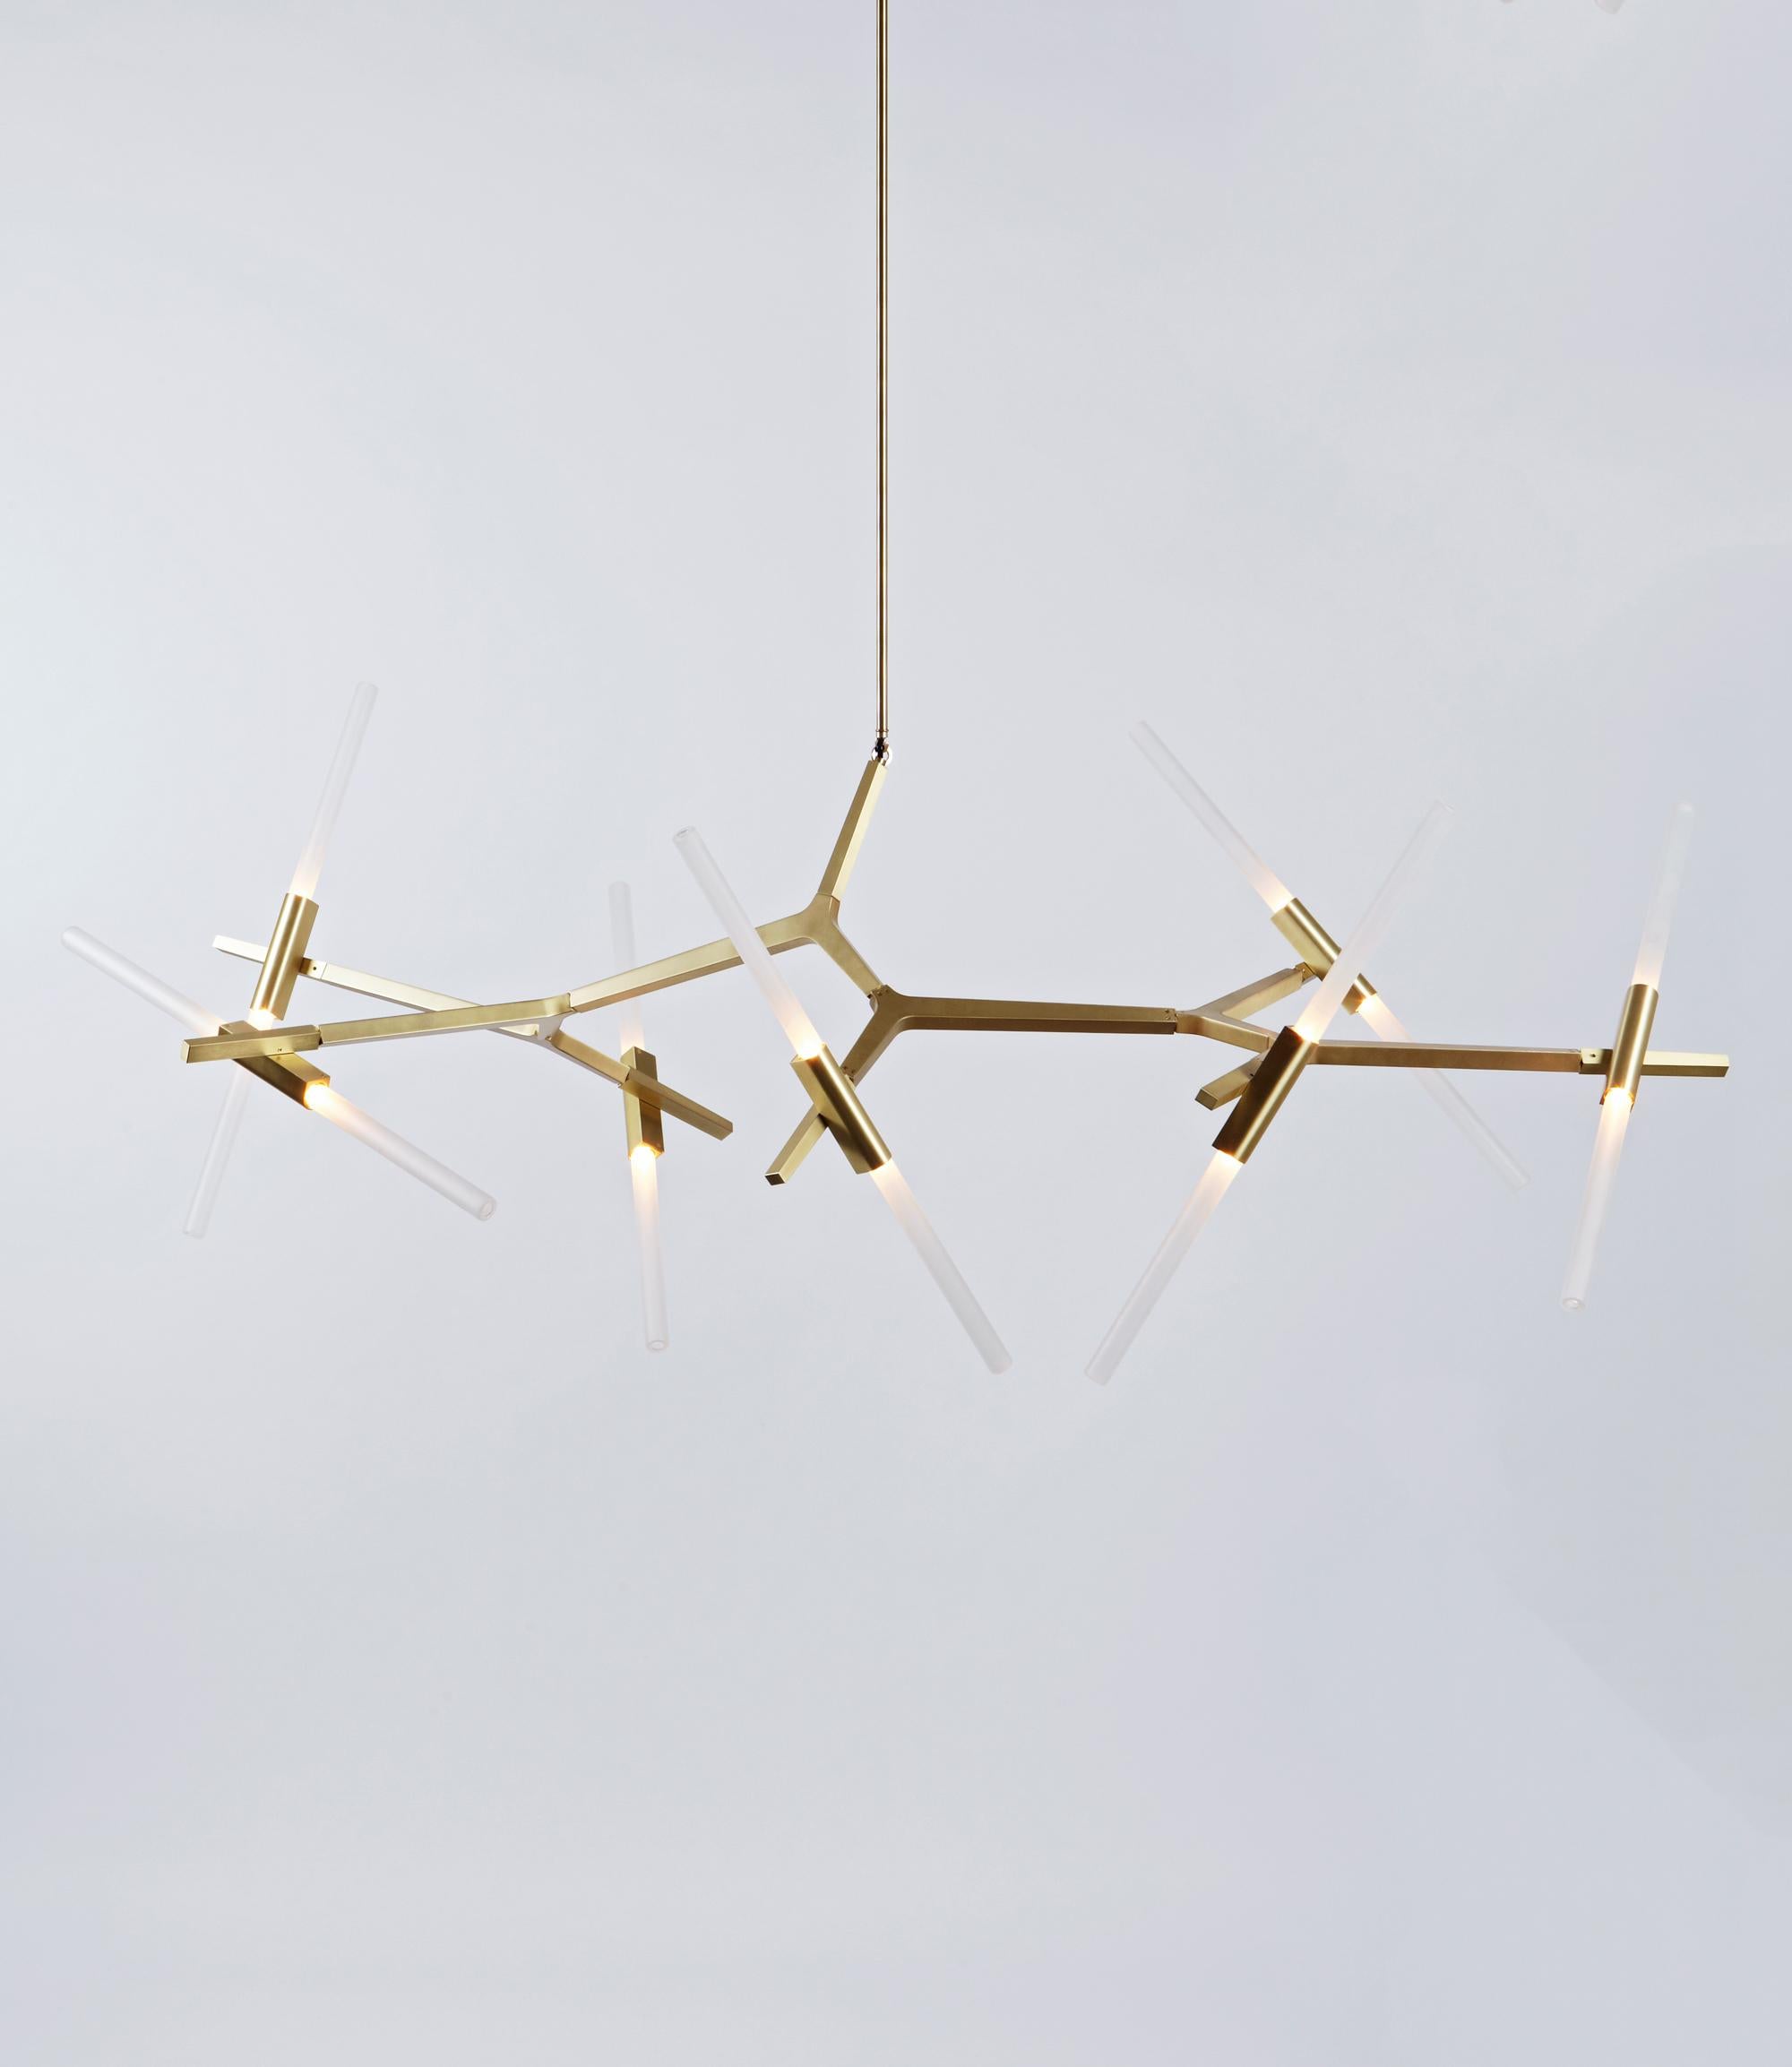 Agnes is a modular metal structure composed of anodized aluminum hardware and white glass shades. Articulating joints allow the bulbs to orient in various ways, ranging anywhere from orderly to chaotic. Originally conceived as a candelabra, Agnes